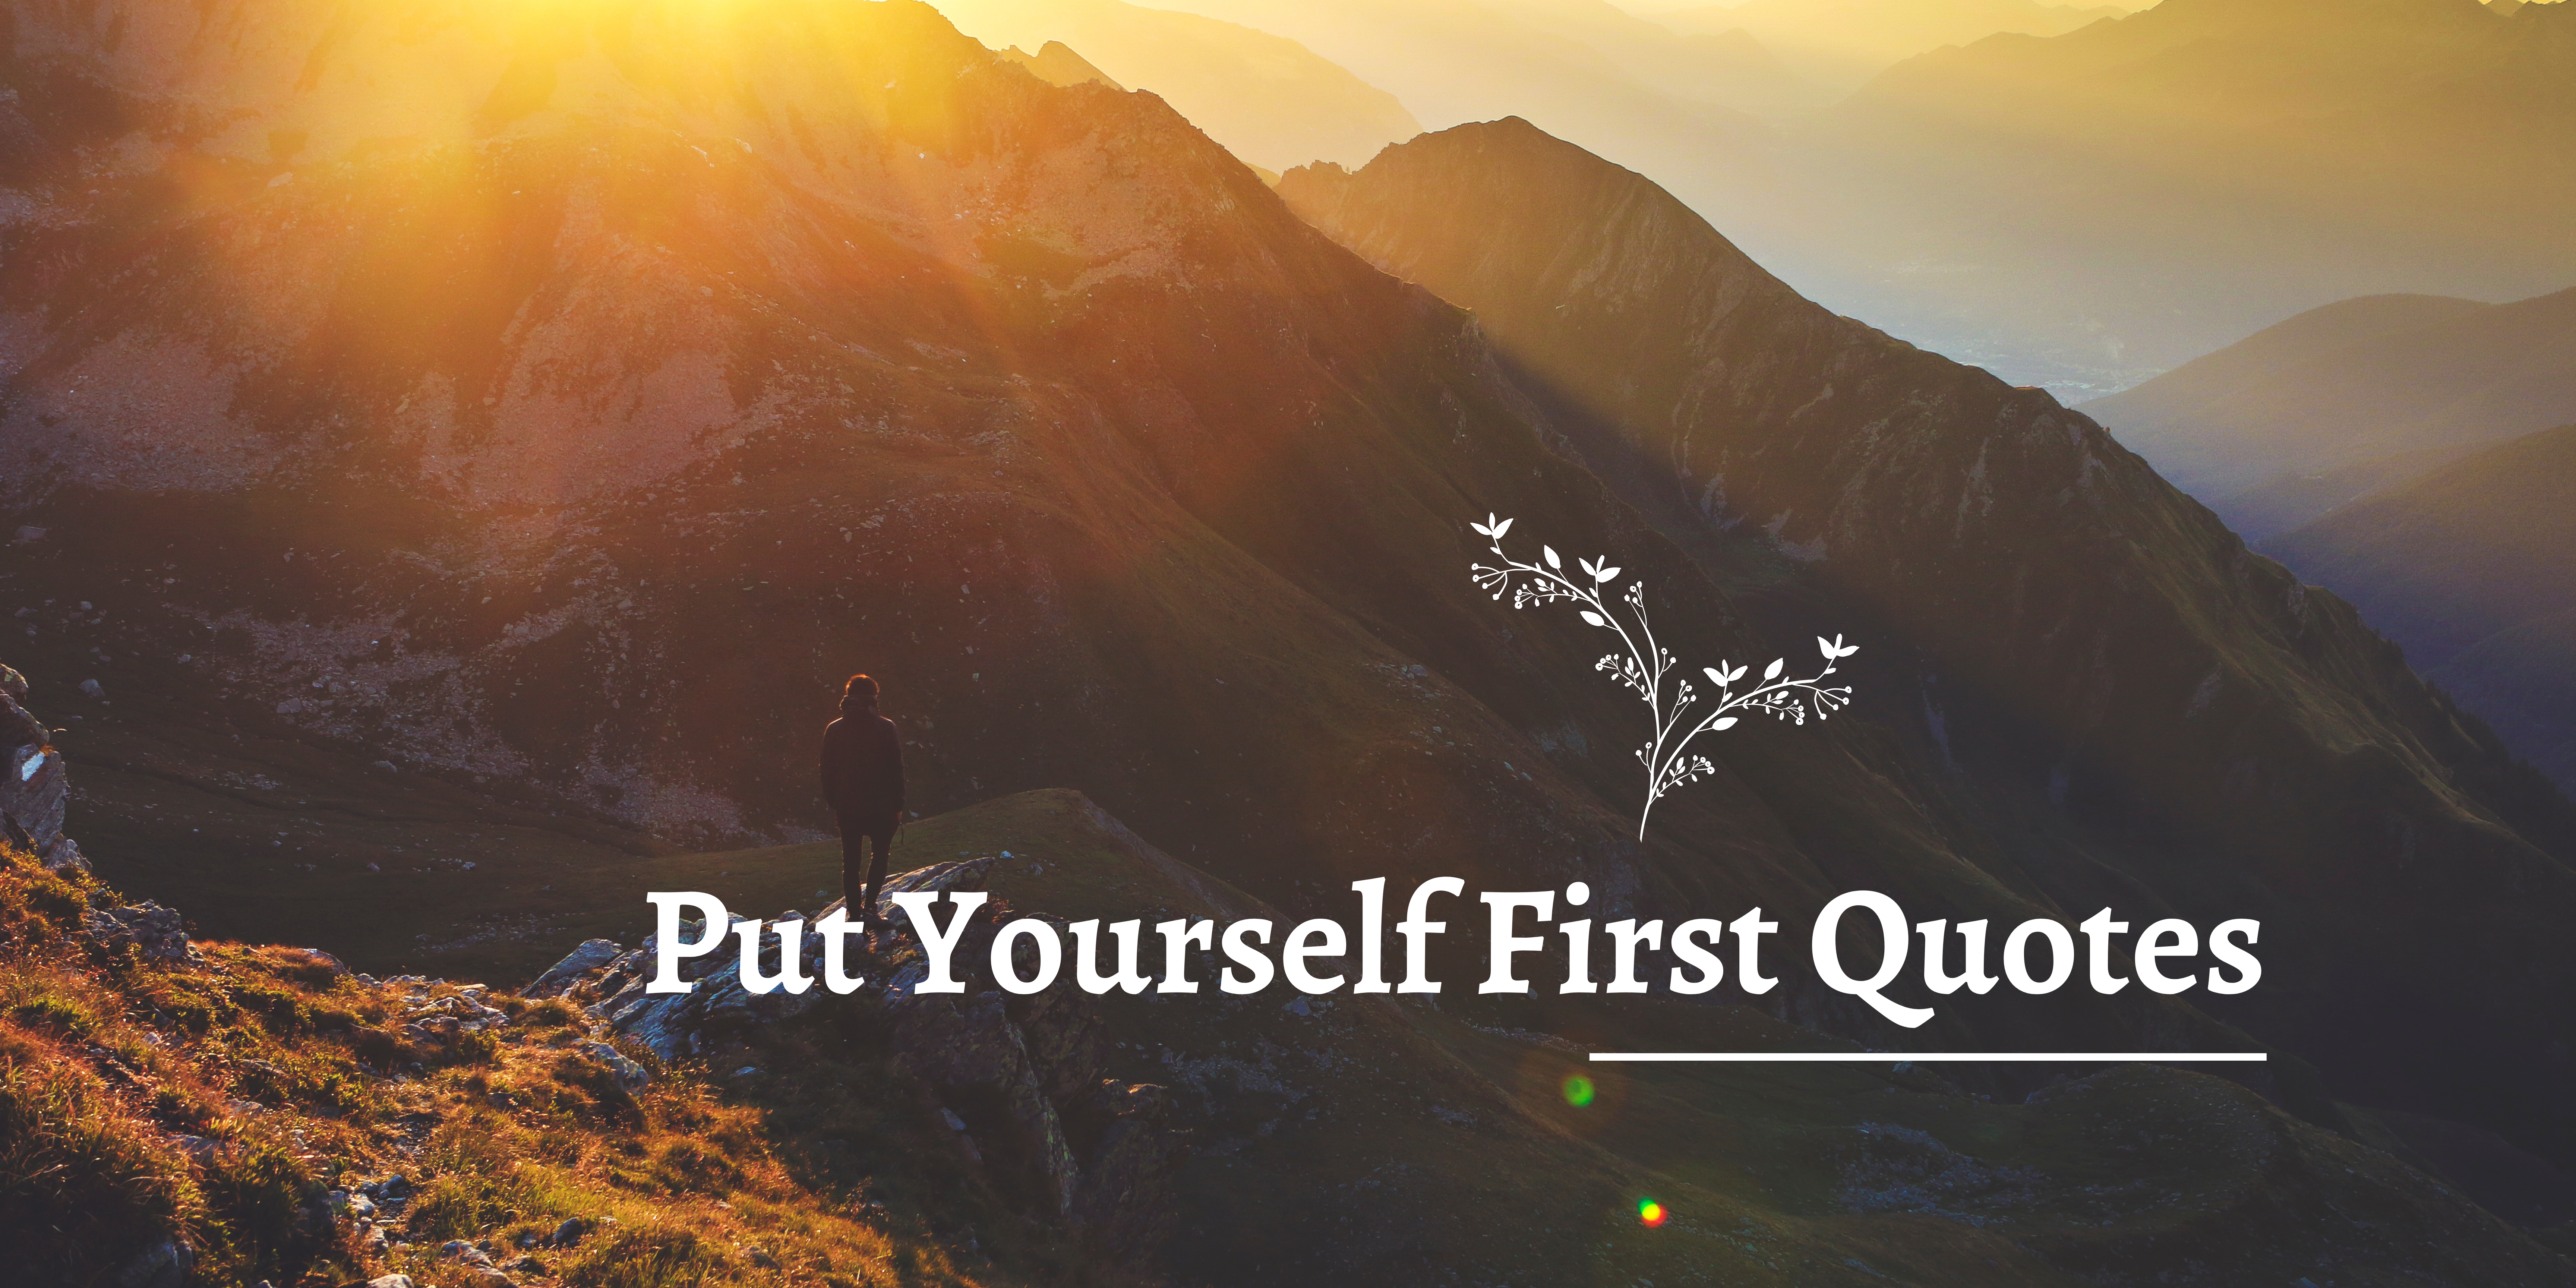 PUT YOUR SELF FIRST QUOTES